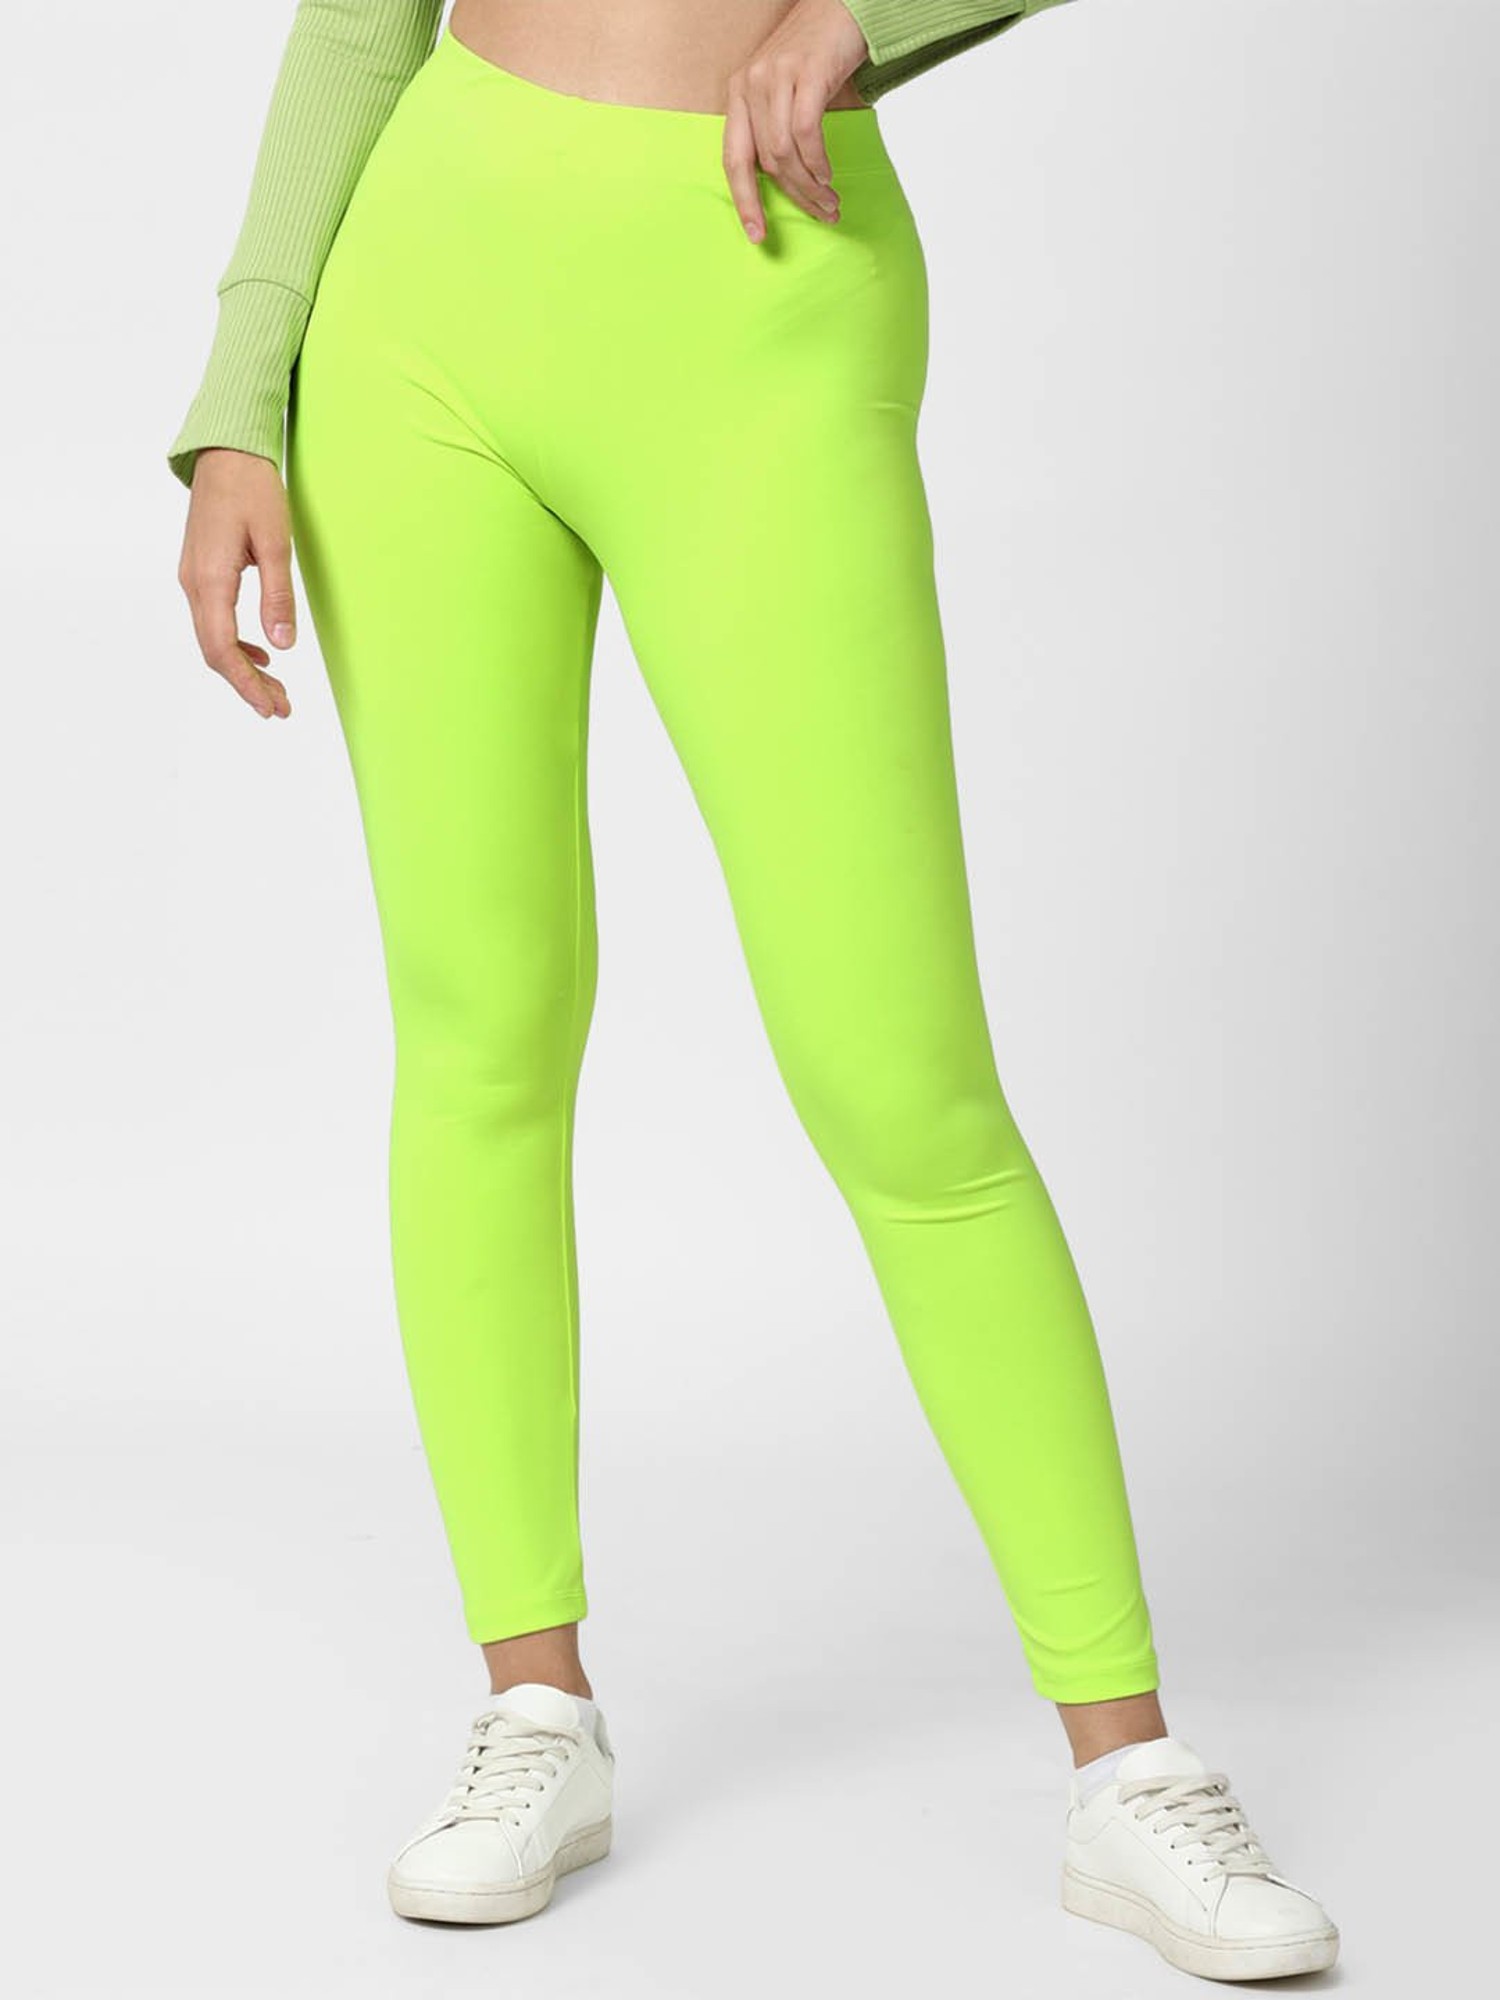 Buy PGS Women's Skinny Fit Ankel Length Cotton Lycra Leggings (Color- Neon  Green | Size- XL) Online In India At Discounted Prices